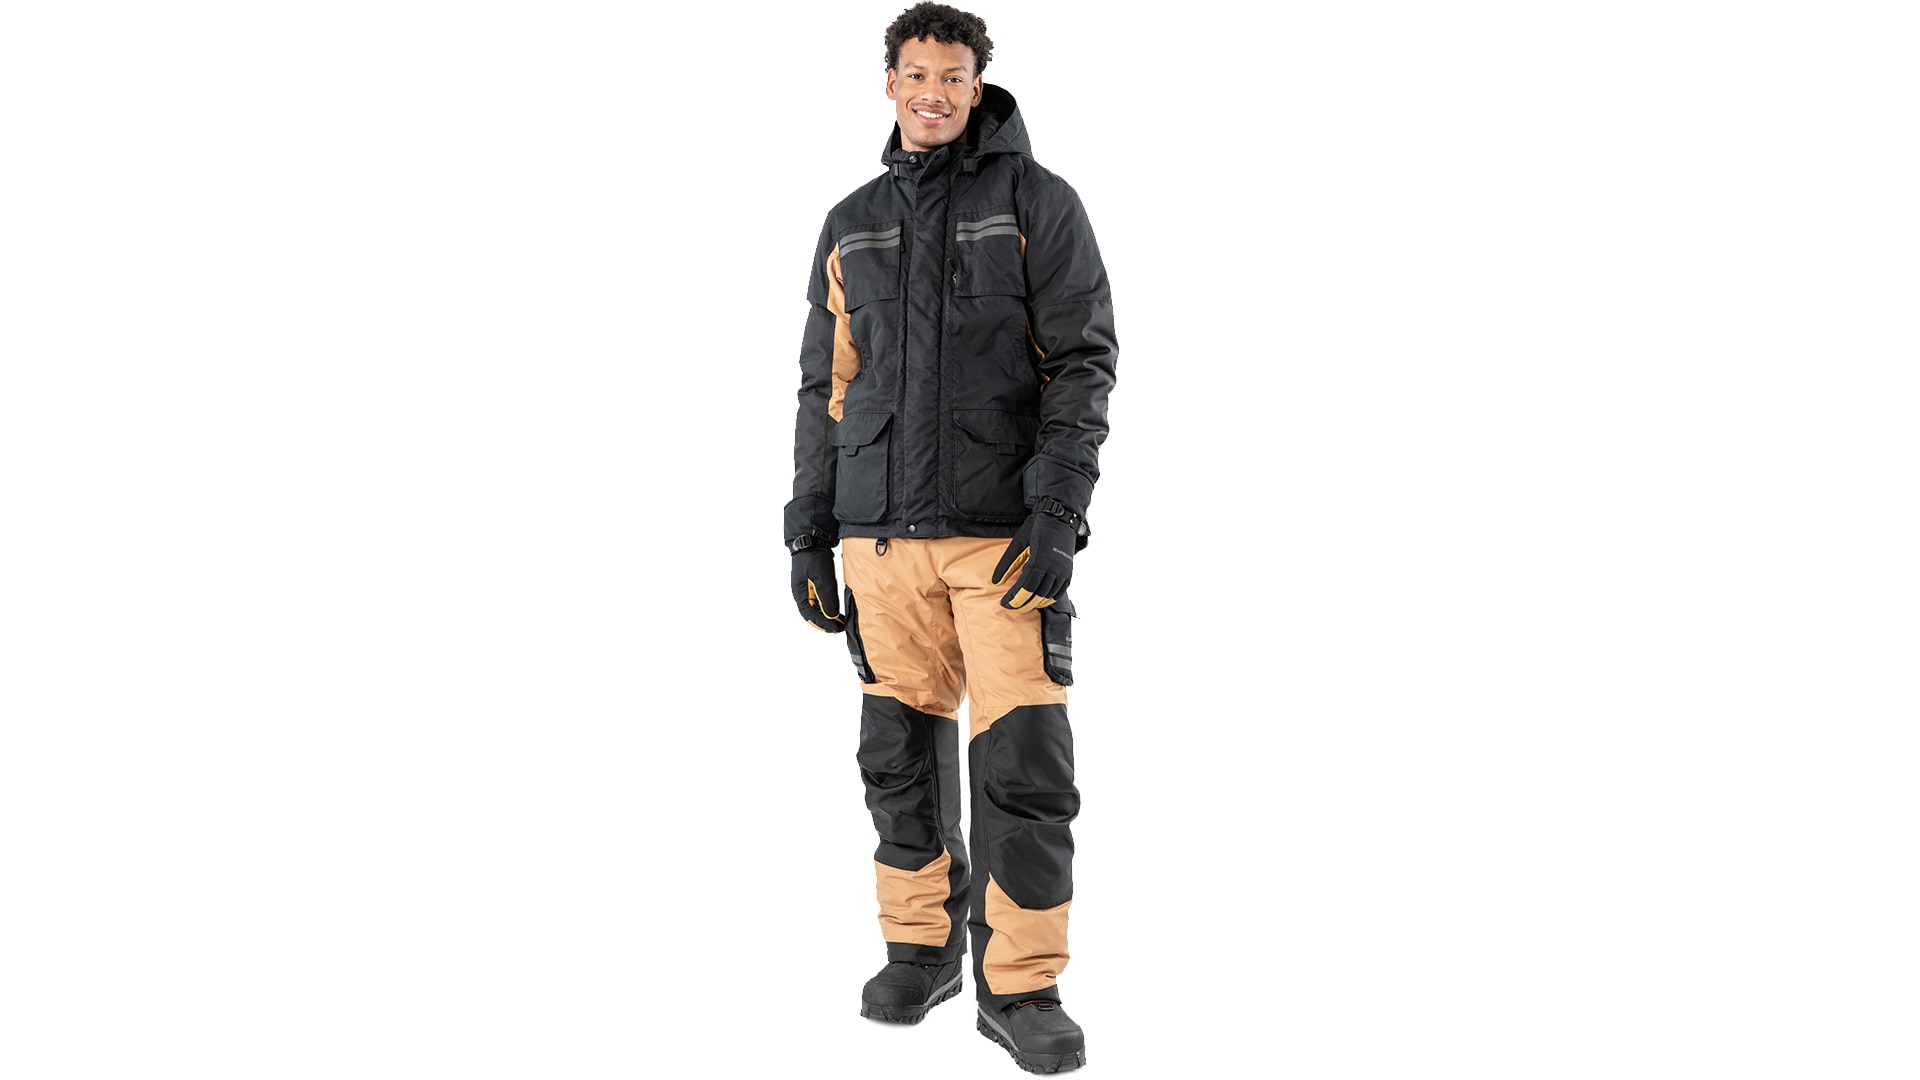 Can-Am rider wearing Expedition Jacket and Highpants.